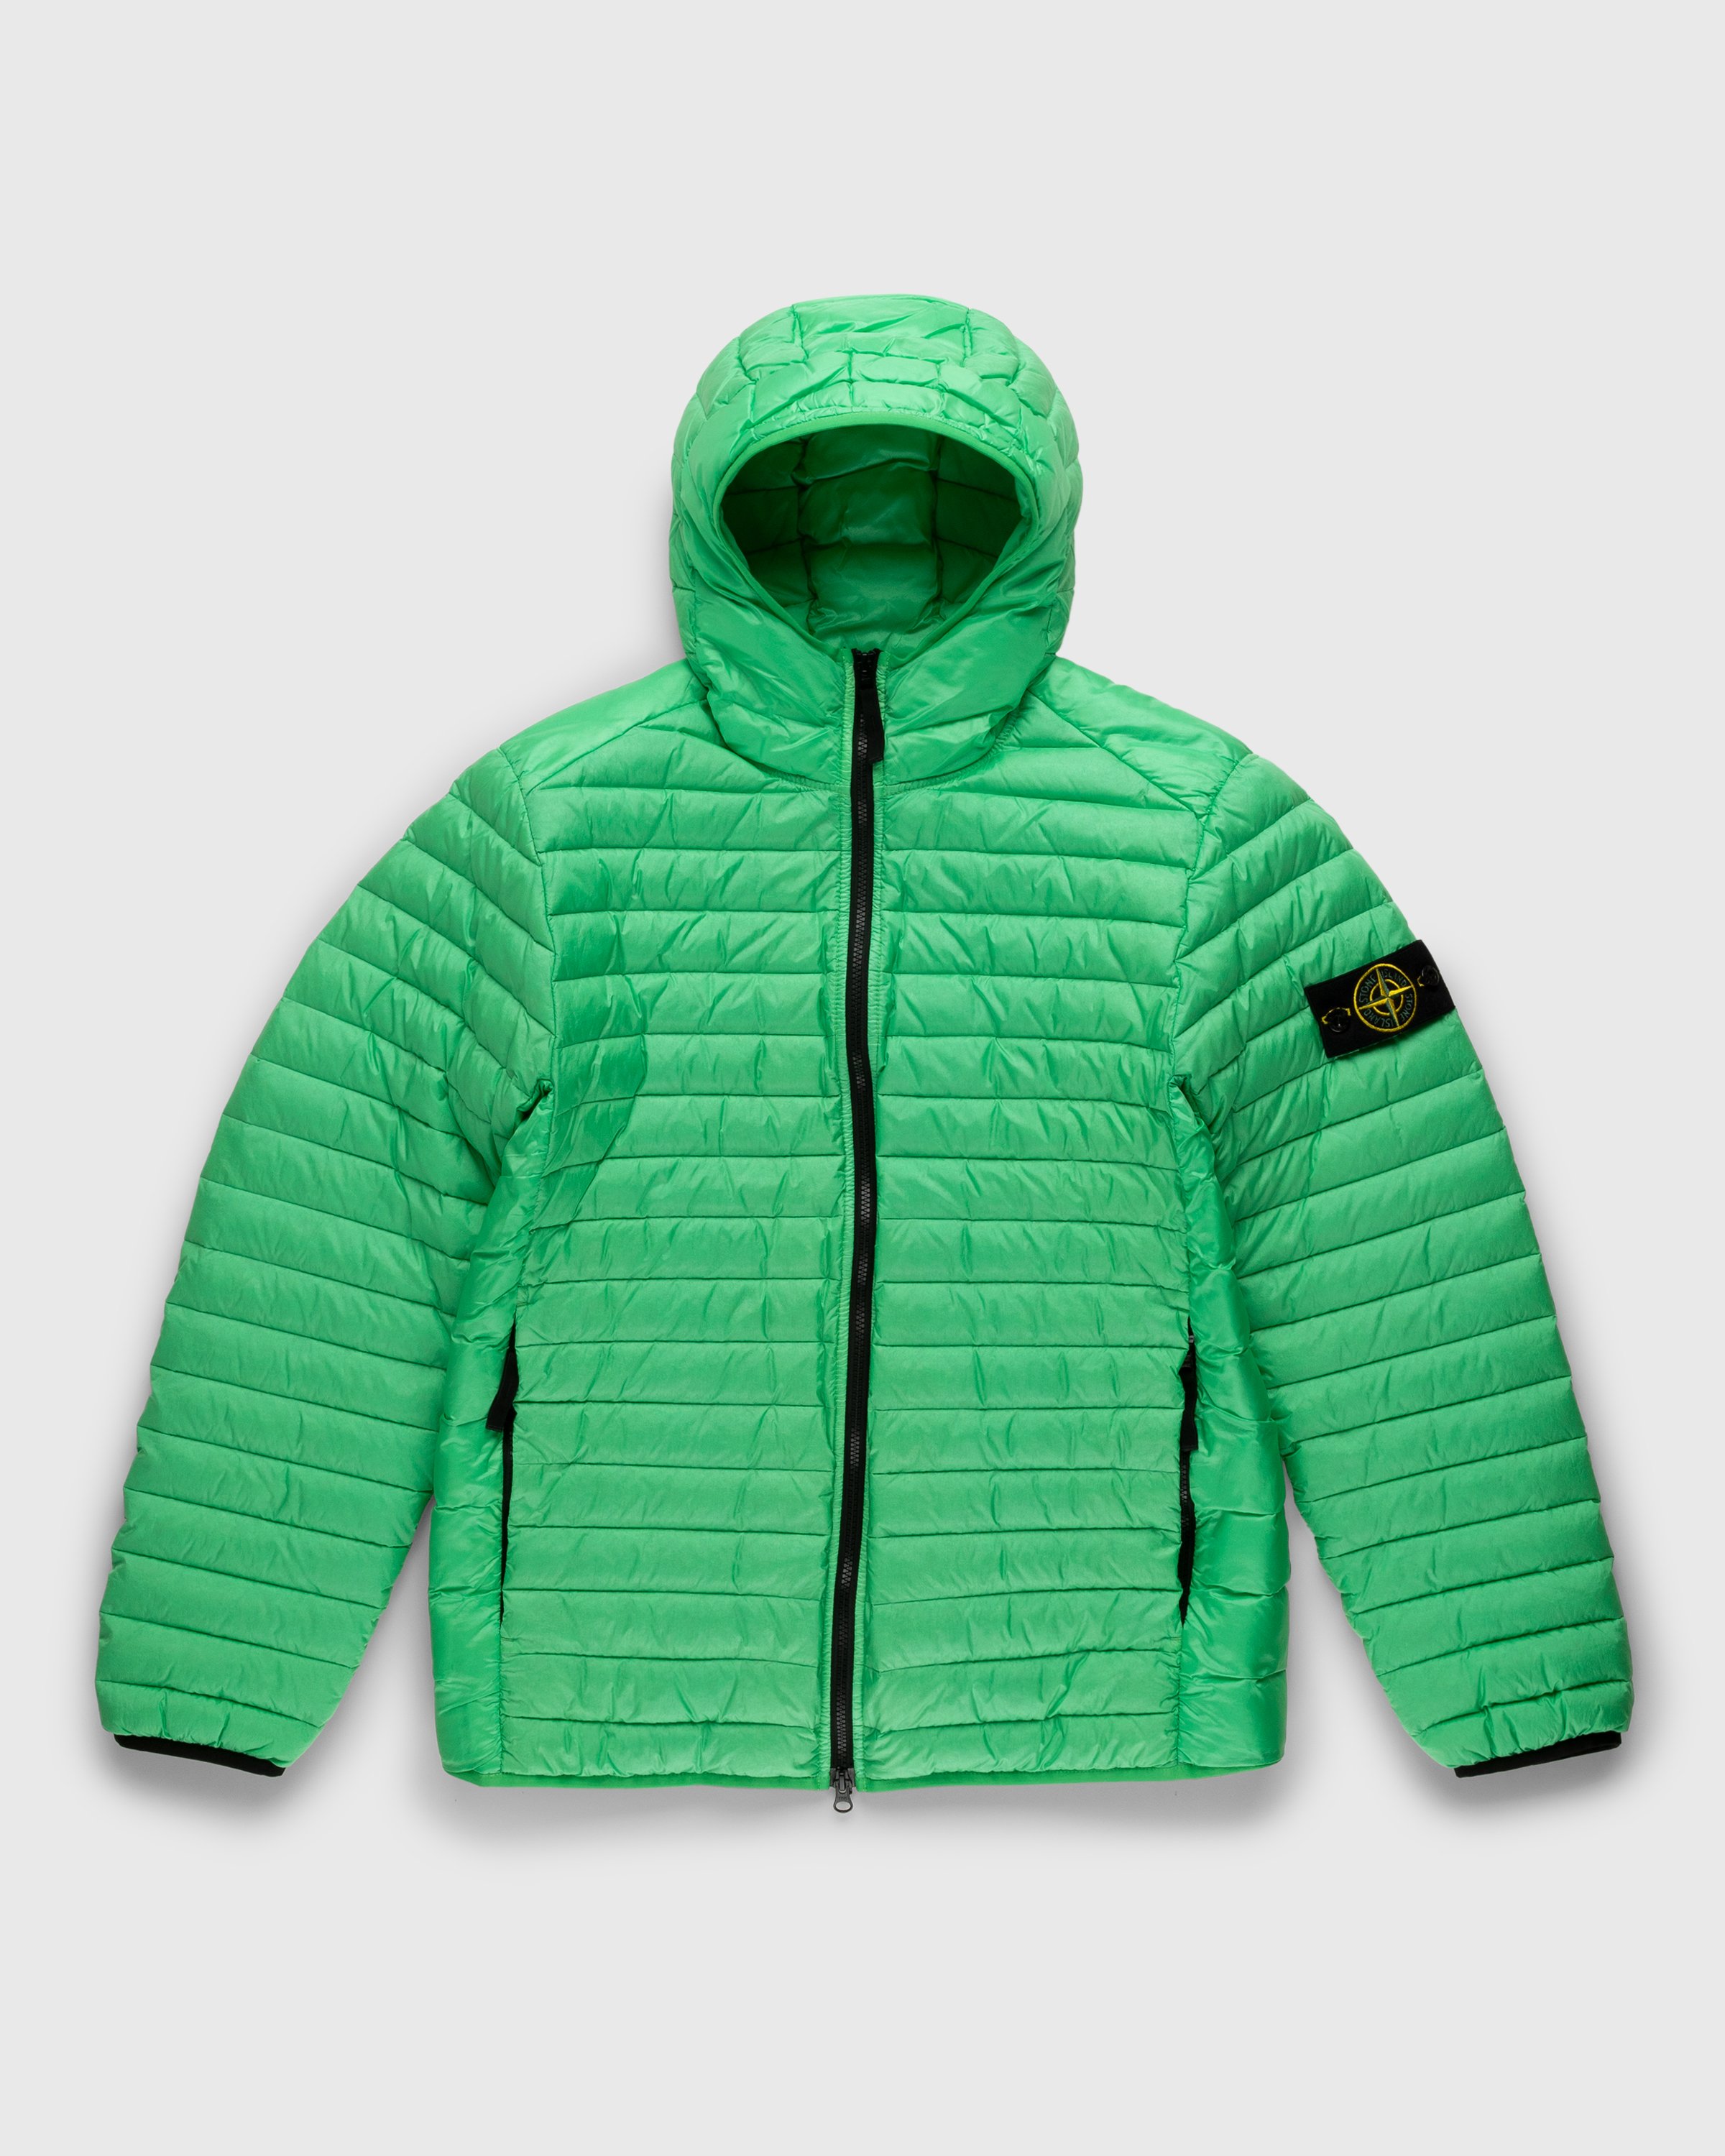 Stone Island - Packable Down Jacket Light Green - Clothing - Green - Image 1